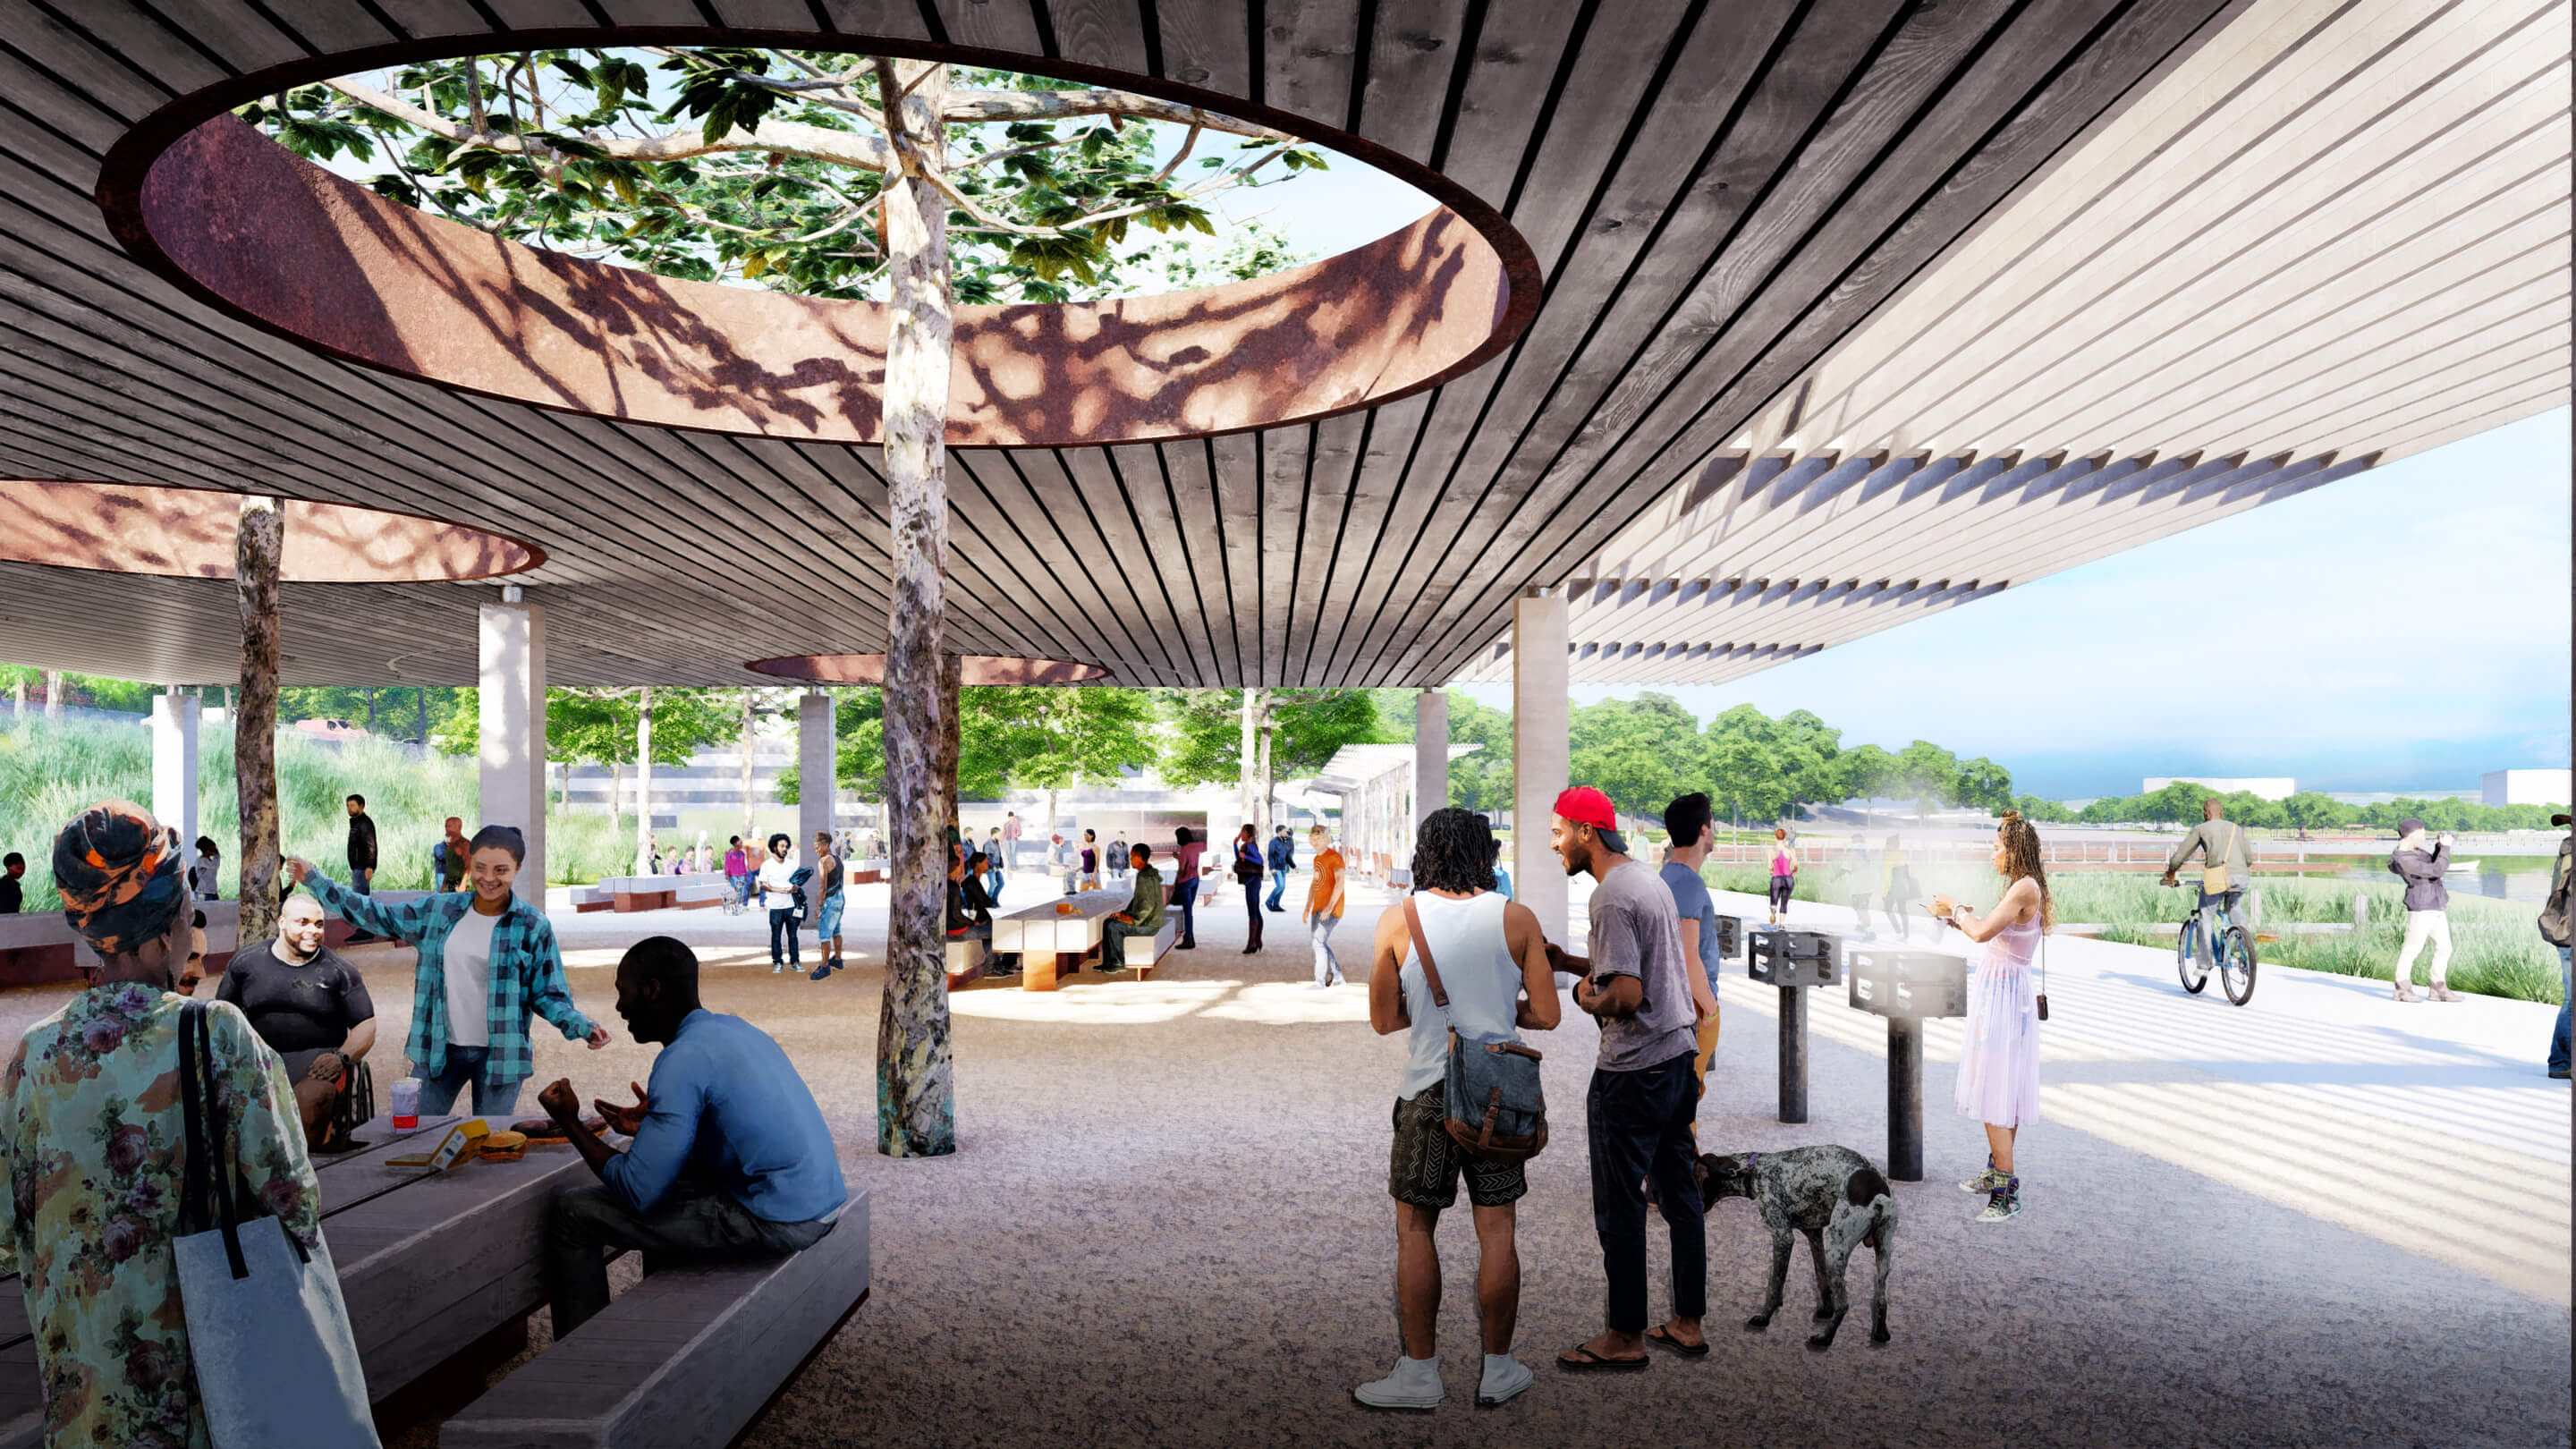 rendering of a shaded pavilion area at a park